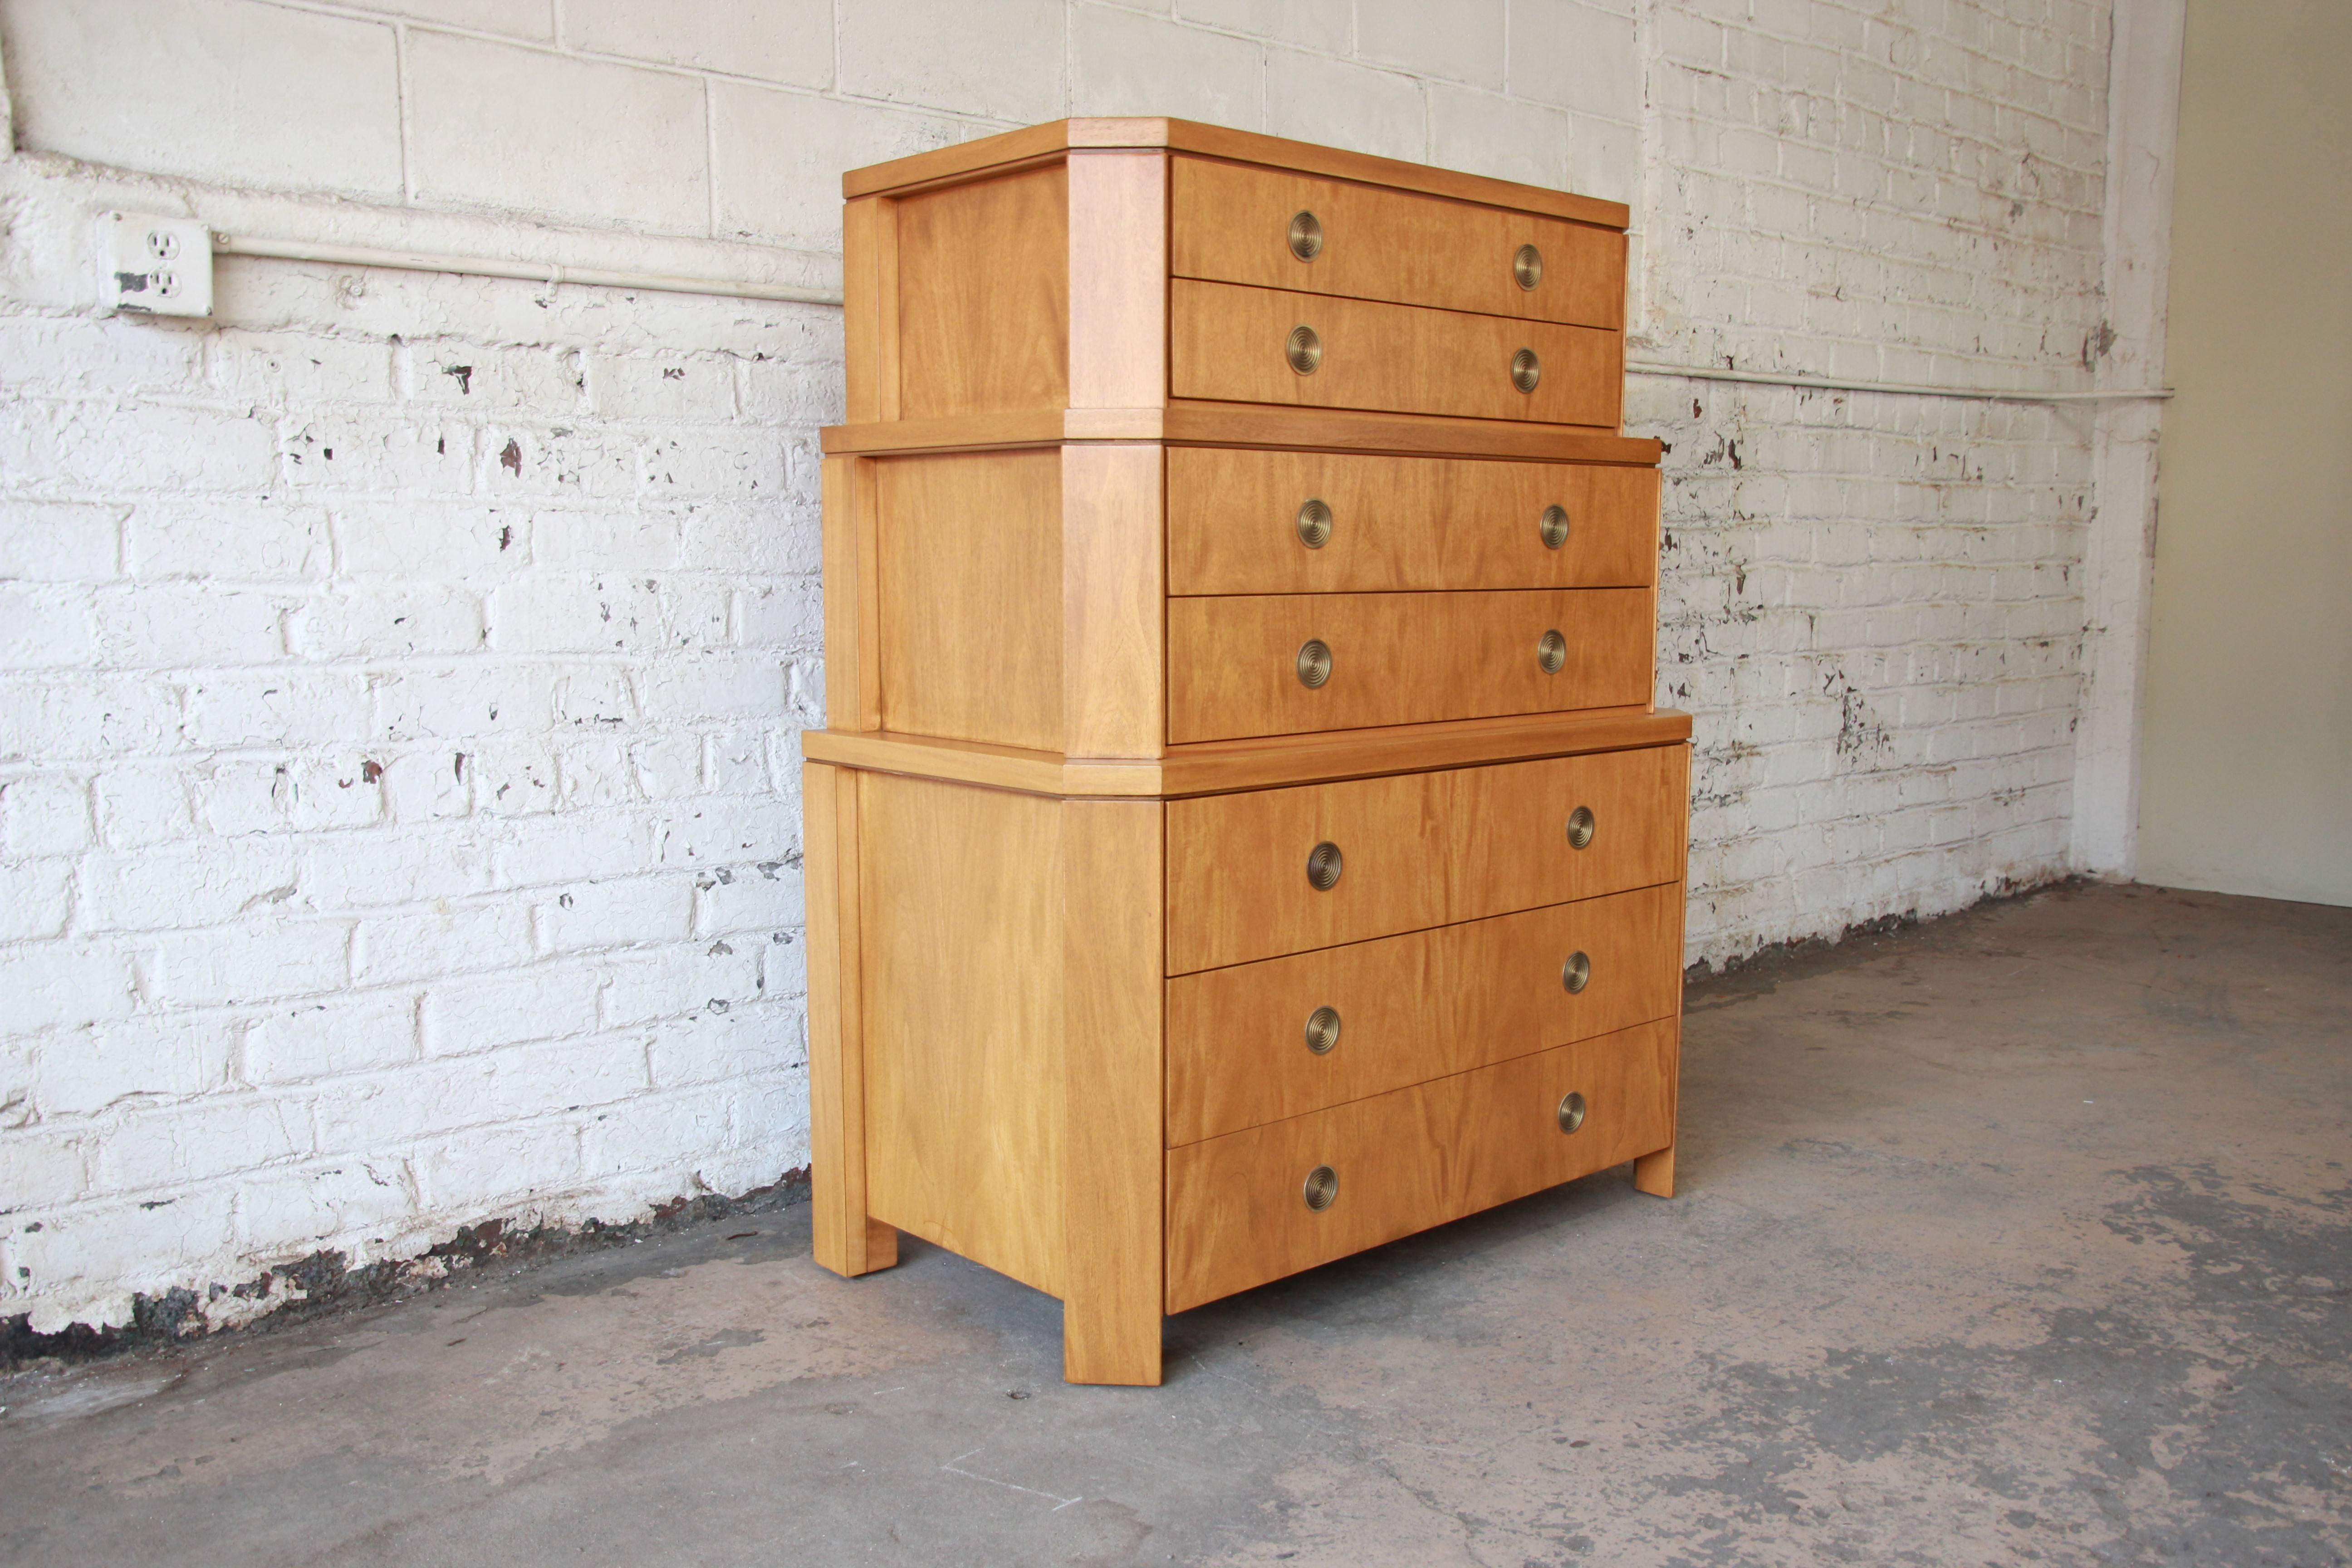 A rare and exceptional triple chest-on-chest highboy dresser by Baker Furniture. From the only collection of residential furniture by renowned San Francisco designer Charles Pfister (1940-1990), this three section chest with canted corners was